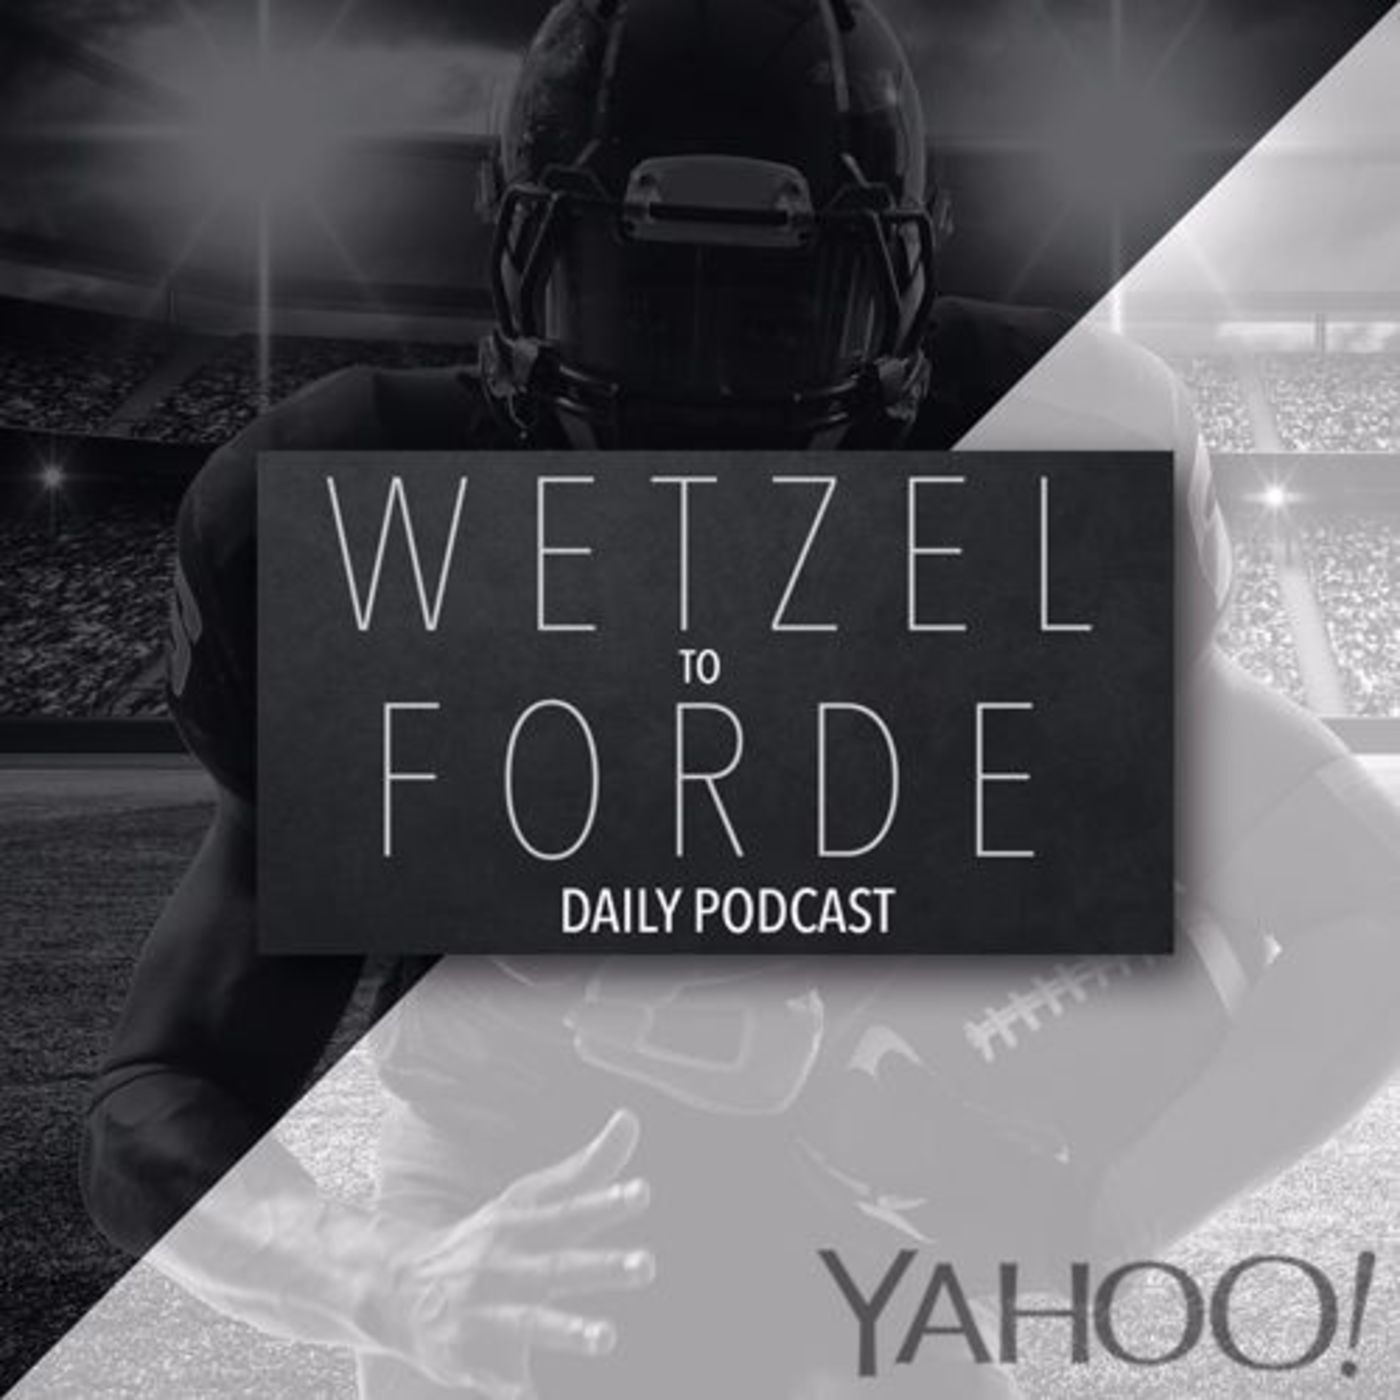 Why is college playoff on New Year's Eve? Wetzel To Forde (12 - 22 - 15)